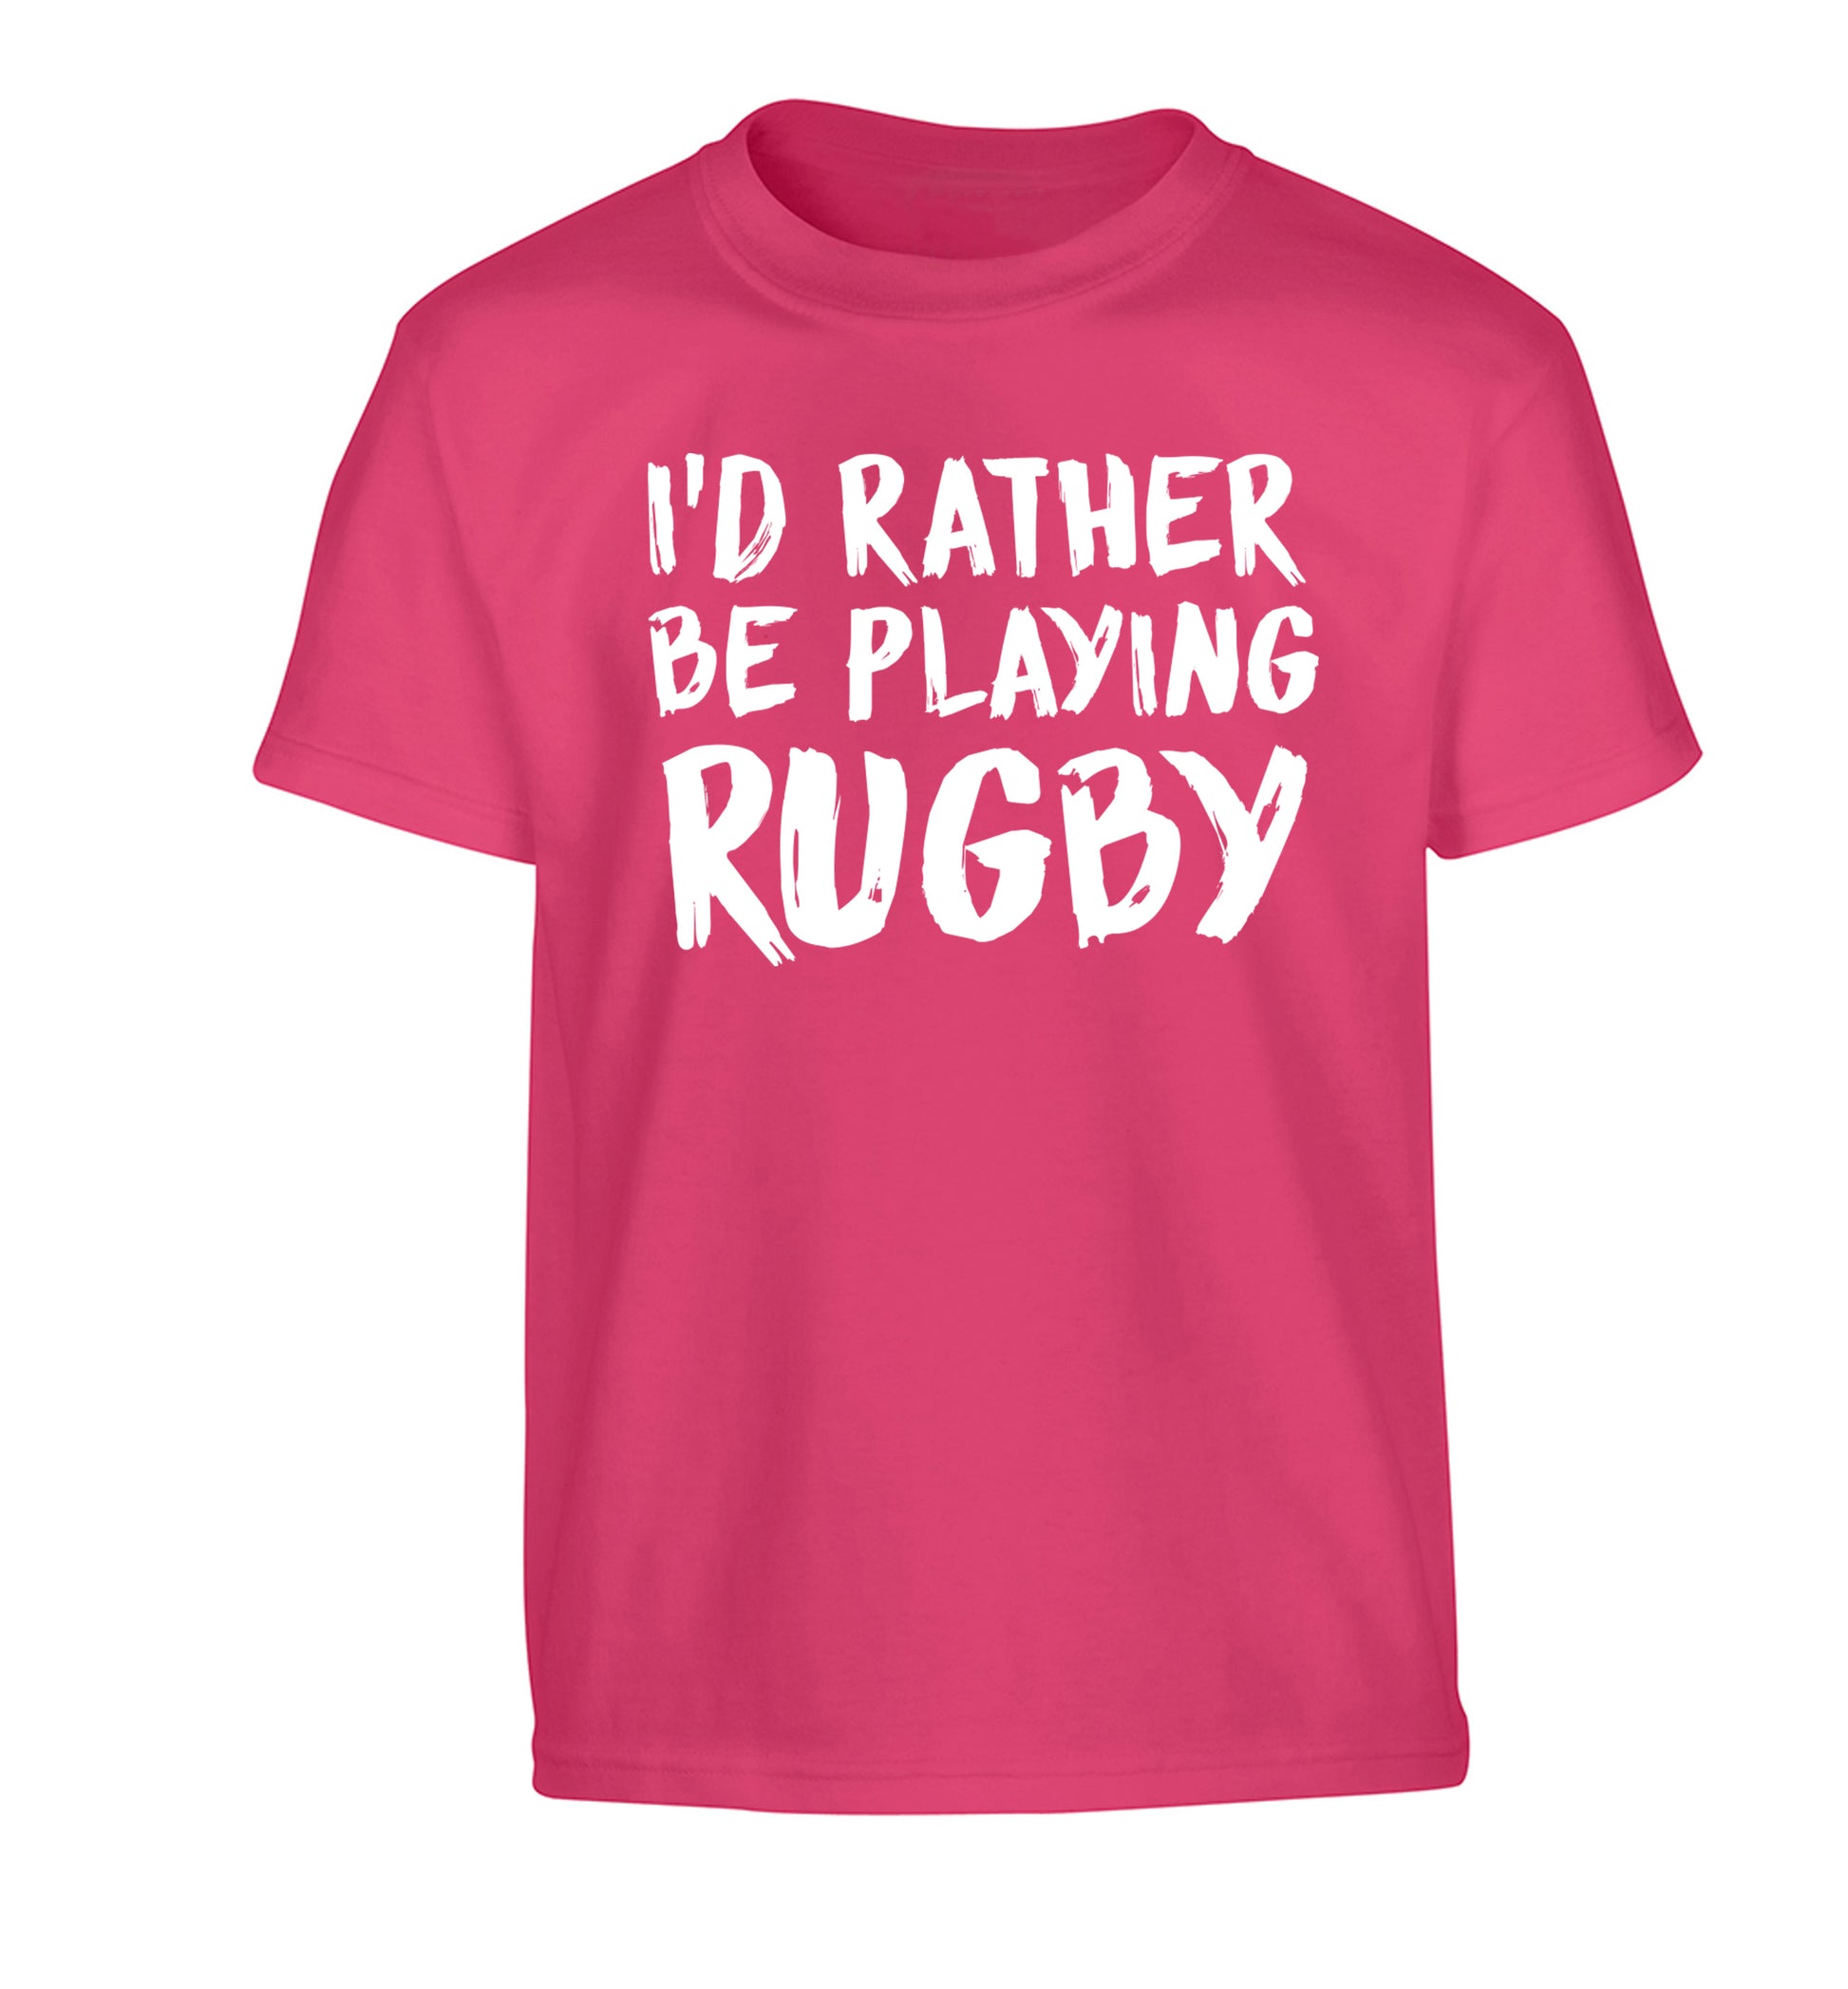 I'd rather be playing rugby Children's pink Tshirt 12-13 Years